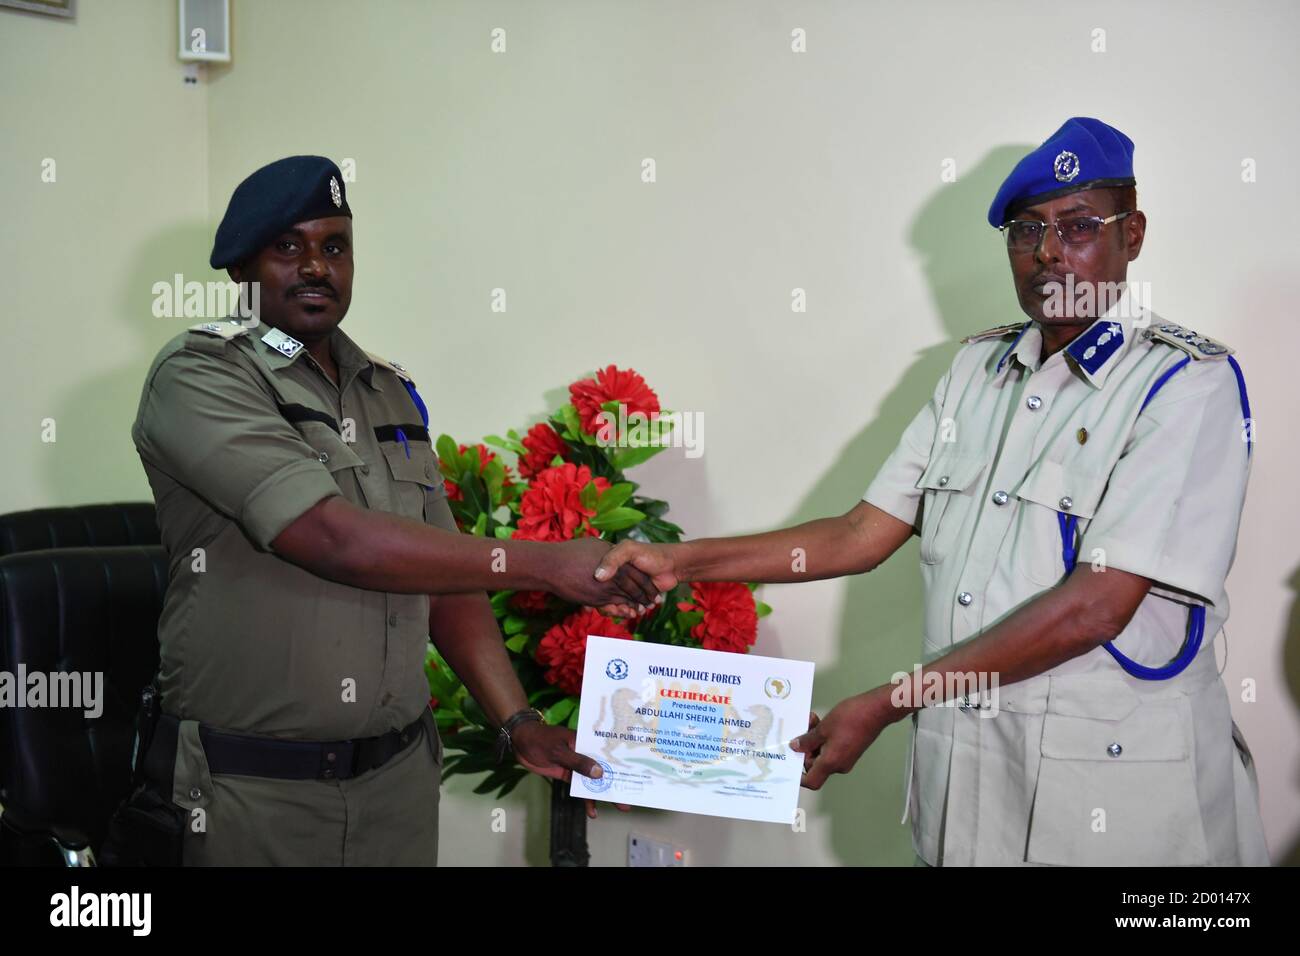 Gen. Hassan Alasow Mohamed, Director of Training and Planning for the Somali Police Force (SPF) hands over a certificate to a police officer at the closing ceremony of one-week training workshop on Media and Public Relations in Mogadishu, Somalia on May 12, 2018.  The training was organized and supported by the African Union Mission in Somalia (AMISOM). Stock Photo